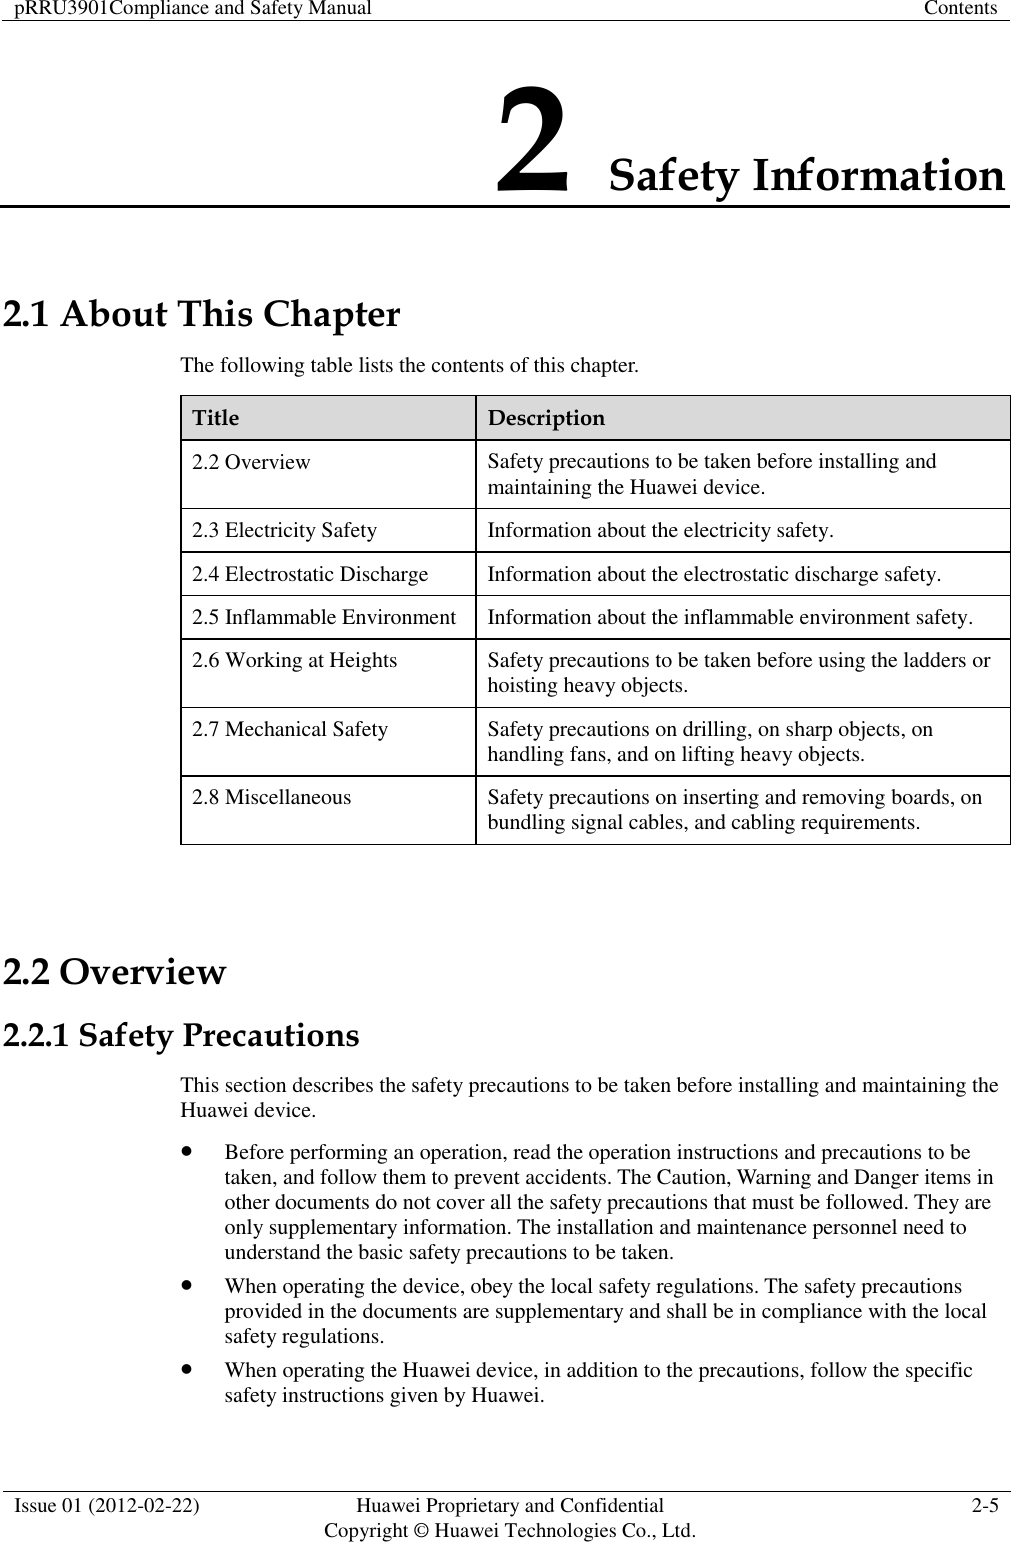 pRRU3901Compliance and Safety Manual Contents  Issue 01 (2012-02-22) Huawei Proprietary and Confidential           Copyright © Huawei Technologies Co., Ltd. 2-5  2 Safety Information 2.1 About This Chapter The following table lists the contents of this chapter. Title Description 2.2 Overview Safety precautions to be taken before installing and maintaining the Huawei device. 2.3 Electricity Safety Information about the electricity safety. 2.4 Electrostatic Discharge Information about the electrostatic discharge safety. 2.5 Inflammable Environment Information about the inflammable environment safety. 2.6 Working at Heights Safety precautions to be taken before using the ladders or hoisting heavy objects. 2.7 Mechanical Safety Safety precautions on drilling, on sharp objects, on handling fans, and on lifting heavy objects. 2.8 Miscellaneous Safety precautions on inserting and removing boards, on bundling signal cables, and cabling requirements.  2.2 Overview 2.2.1 Safety Precautions This section describes the safety precautions to be taken before installing and maintaining the Huawei device.  Before performing an operation, read the operation instructions and precautions to be taken, and follow them to prevent accidents. The Caution, Warning and Danger items in other documents do not cover all the safety precautions that must be followed. They are only supplementary information. The installation and maintenance personnel need to understand the basic safety precautions to be taken.  When operating the device, obey the local safety regulations. The safety precautions provided in the documents are supplementary and shall be in compliance with the local safety regulations.  When operating the Huawei device, in addition to the precautions, follow the specific safety instructions given by Huawei. 